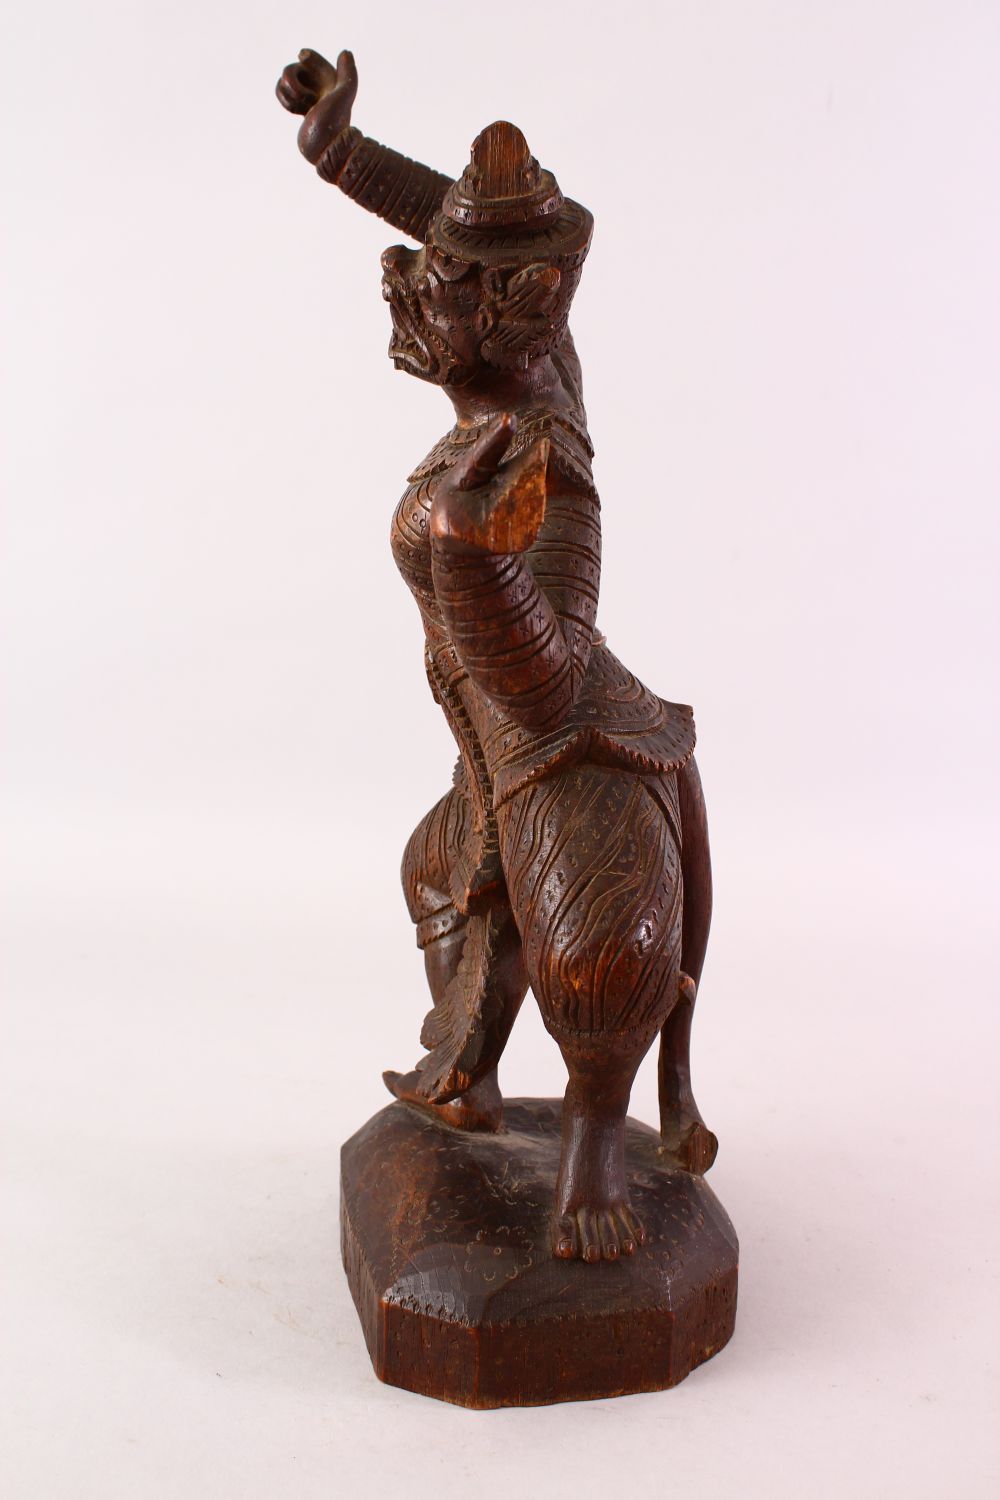 A GOOD 19TH CENTURY OR EARLIER BURMESE CARVED WOODEN FIGURE OF A DEITY, 48cm high. - Image 5 of 8